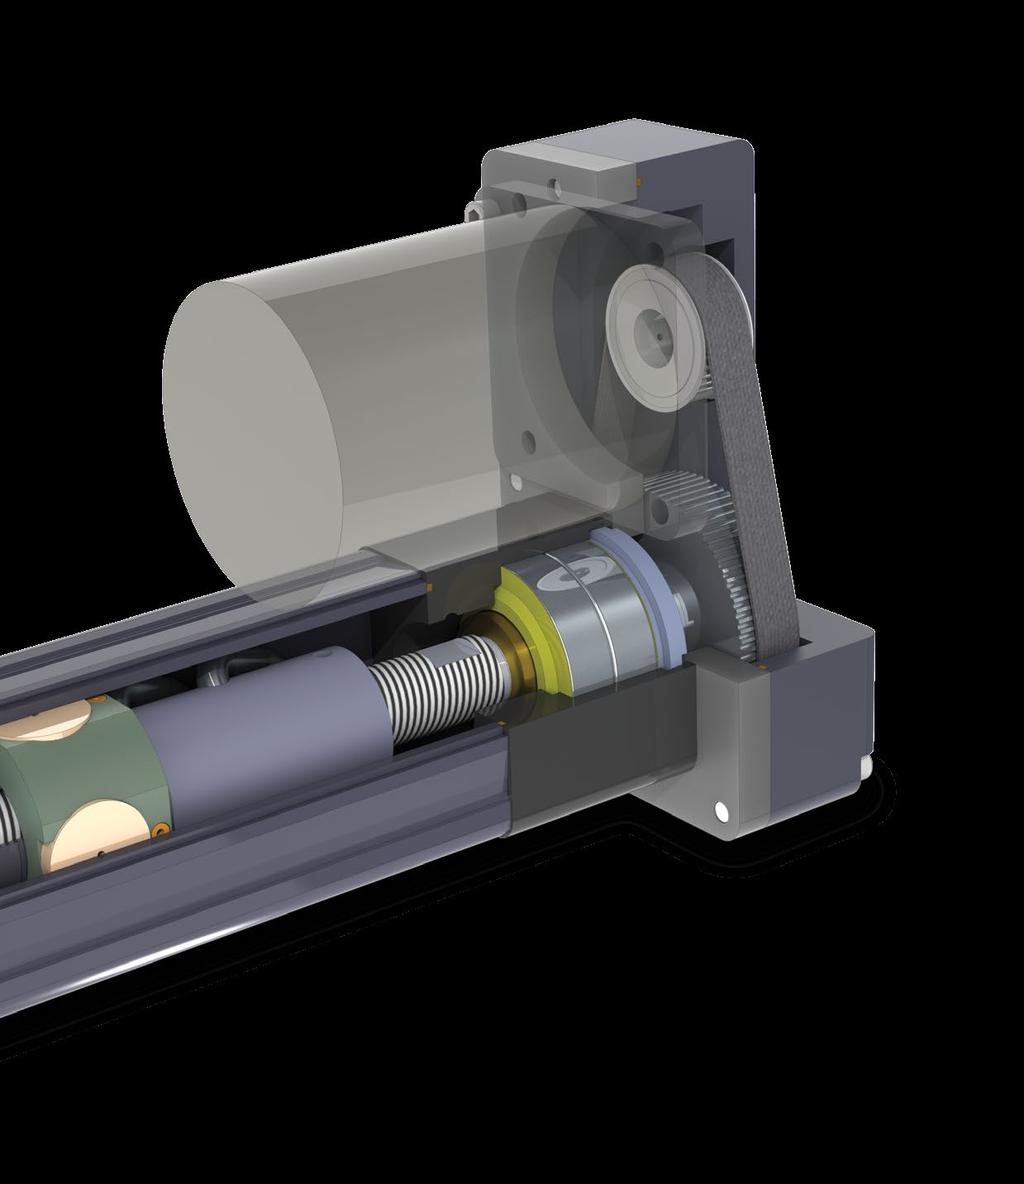 RSA-HT OPTION The HT option is a higher thrust option for the, 5 and 64 sizes of the RSA family. RSA actuators with roller nuts are always HT option actuators.